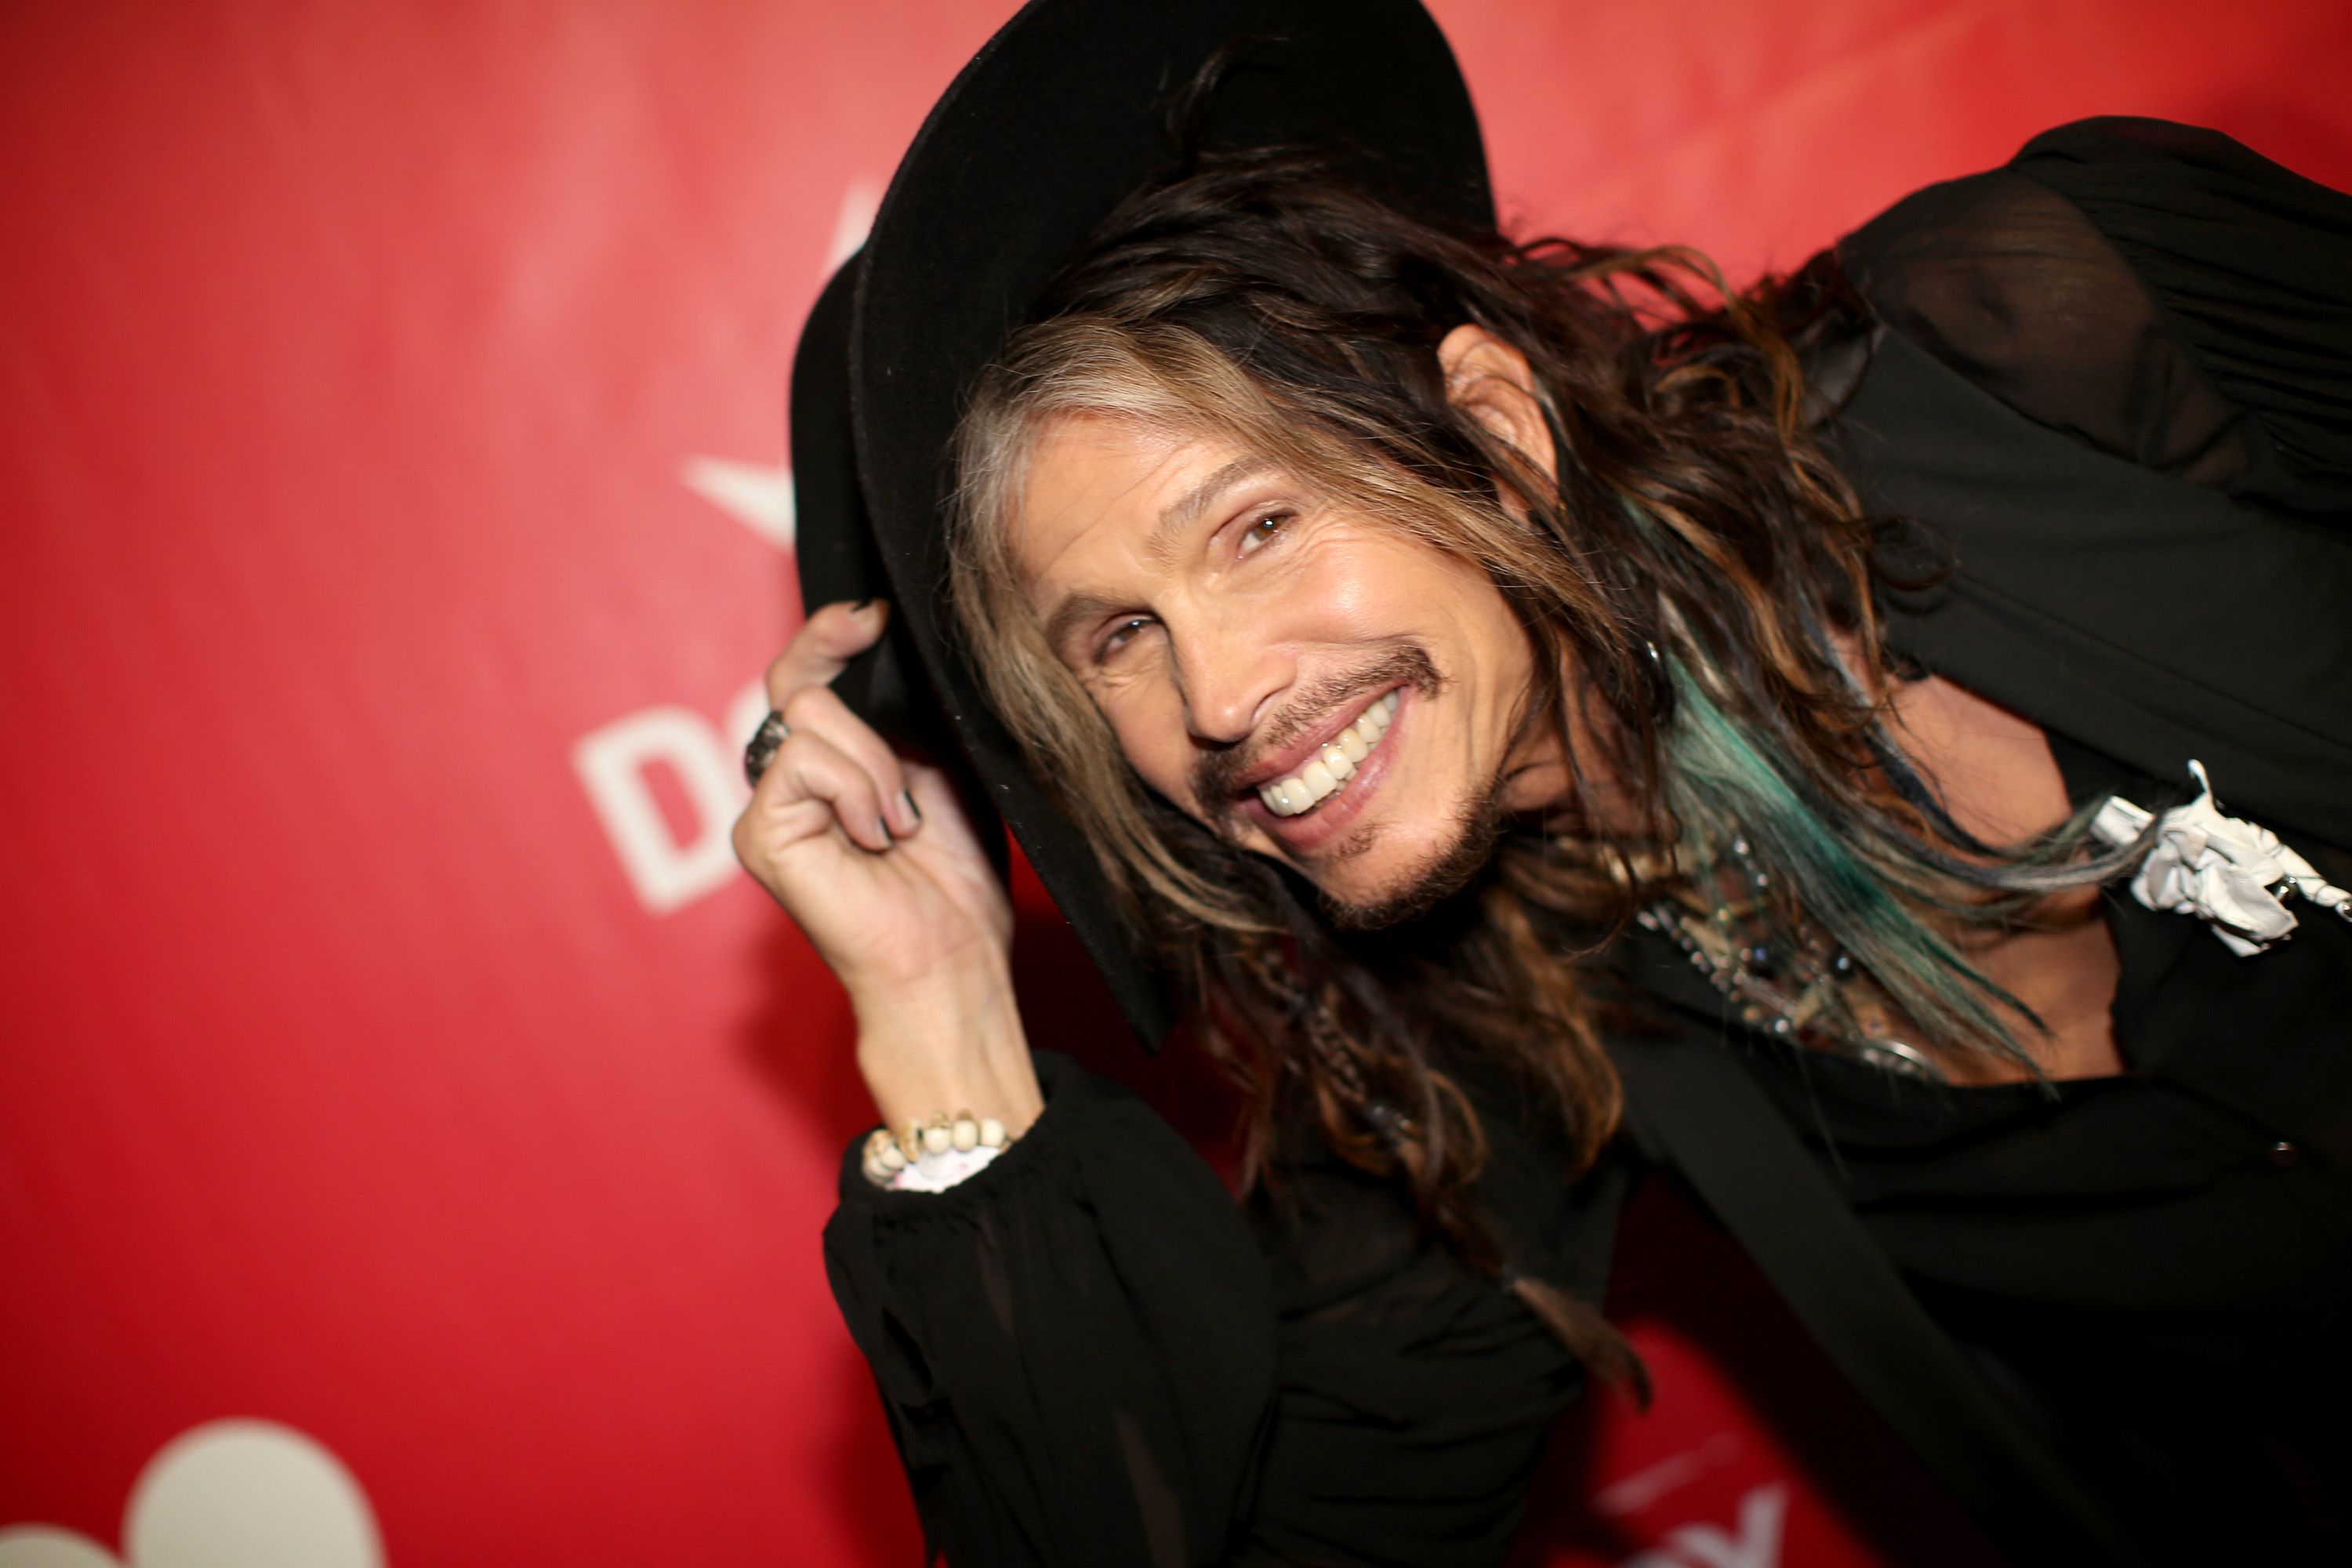 LOS ANGELES, CA - JANUARY 24: Singer Steven Tyler of Aerosmith attends 2014 MusiCares Person Of The Year Honoring Carole King at Los Angeles Convention Center on January 24, 2014 in Los Angeles, California. (Photo by Christopher Polk/Getty Images for NARAS)